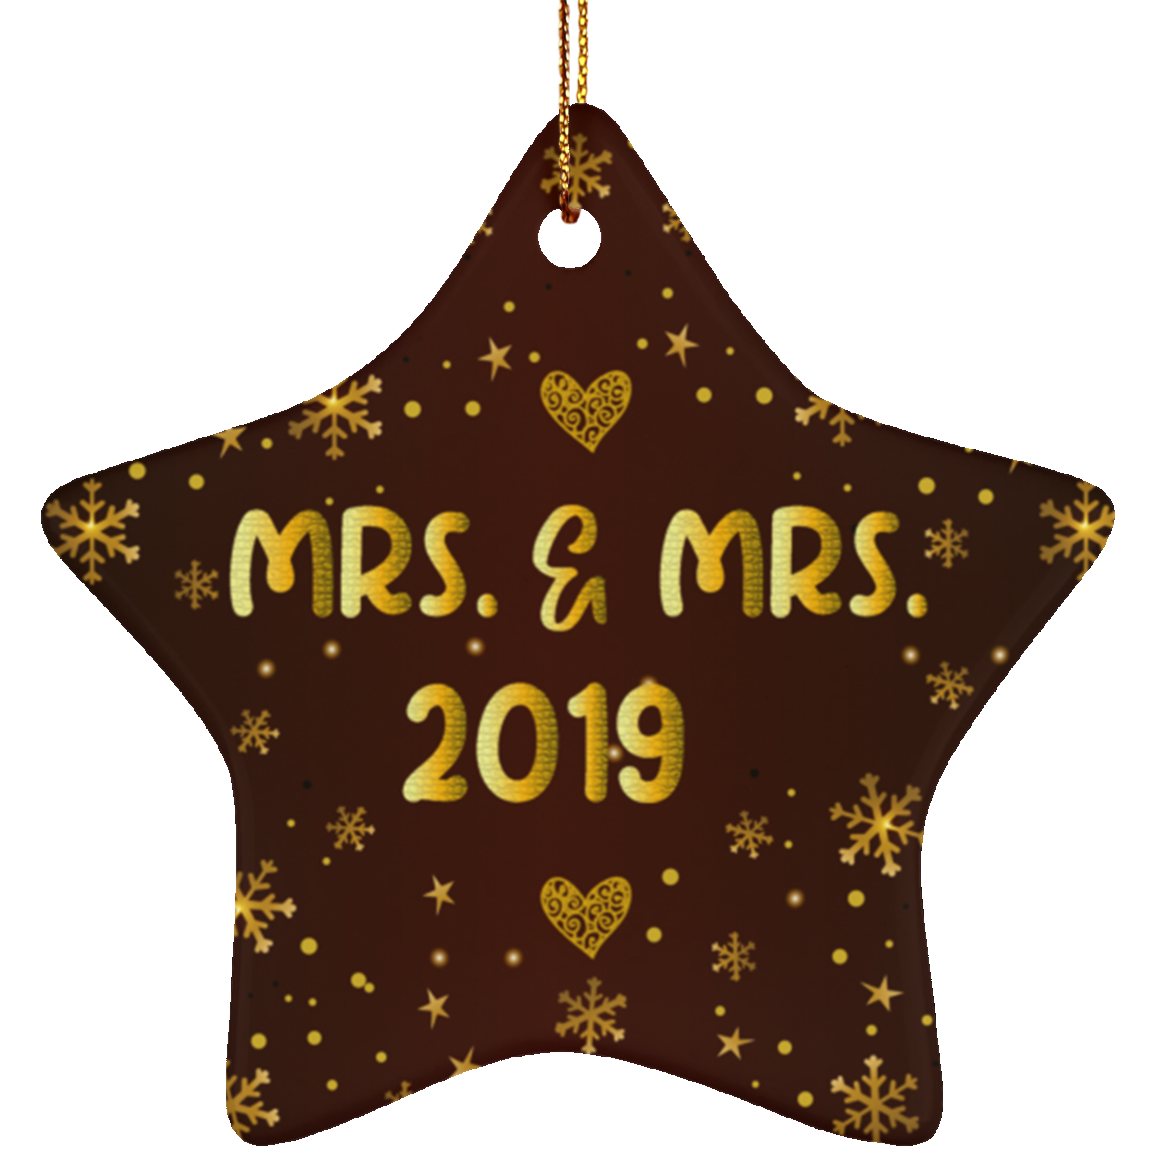 Mrs and Mrs 2019 LGBT Pride Ceramic Star Christmas Ornament Gift For Lesbian, Gay Couple